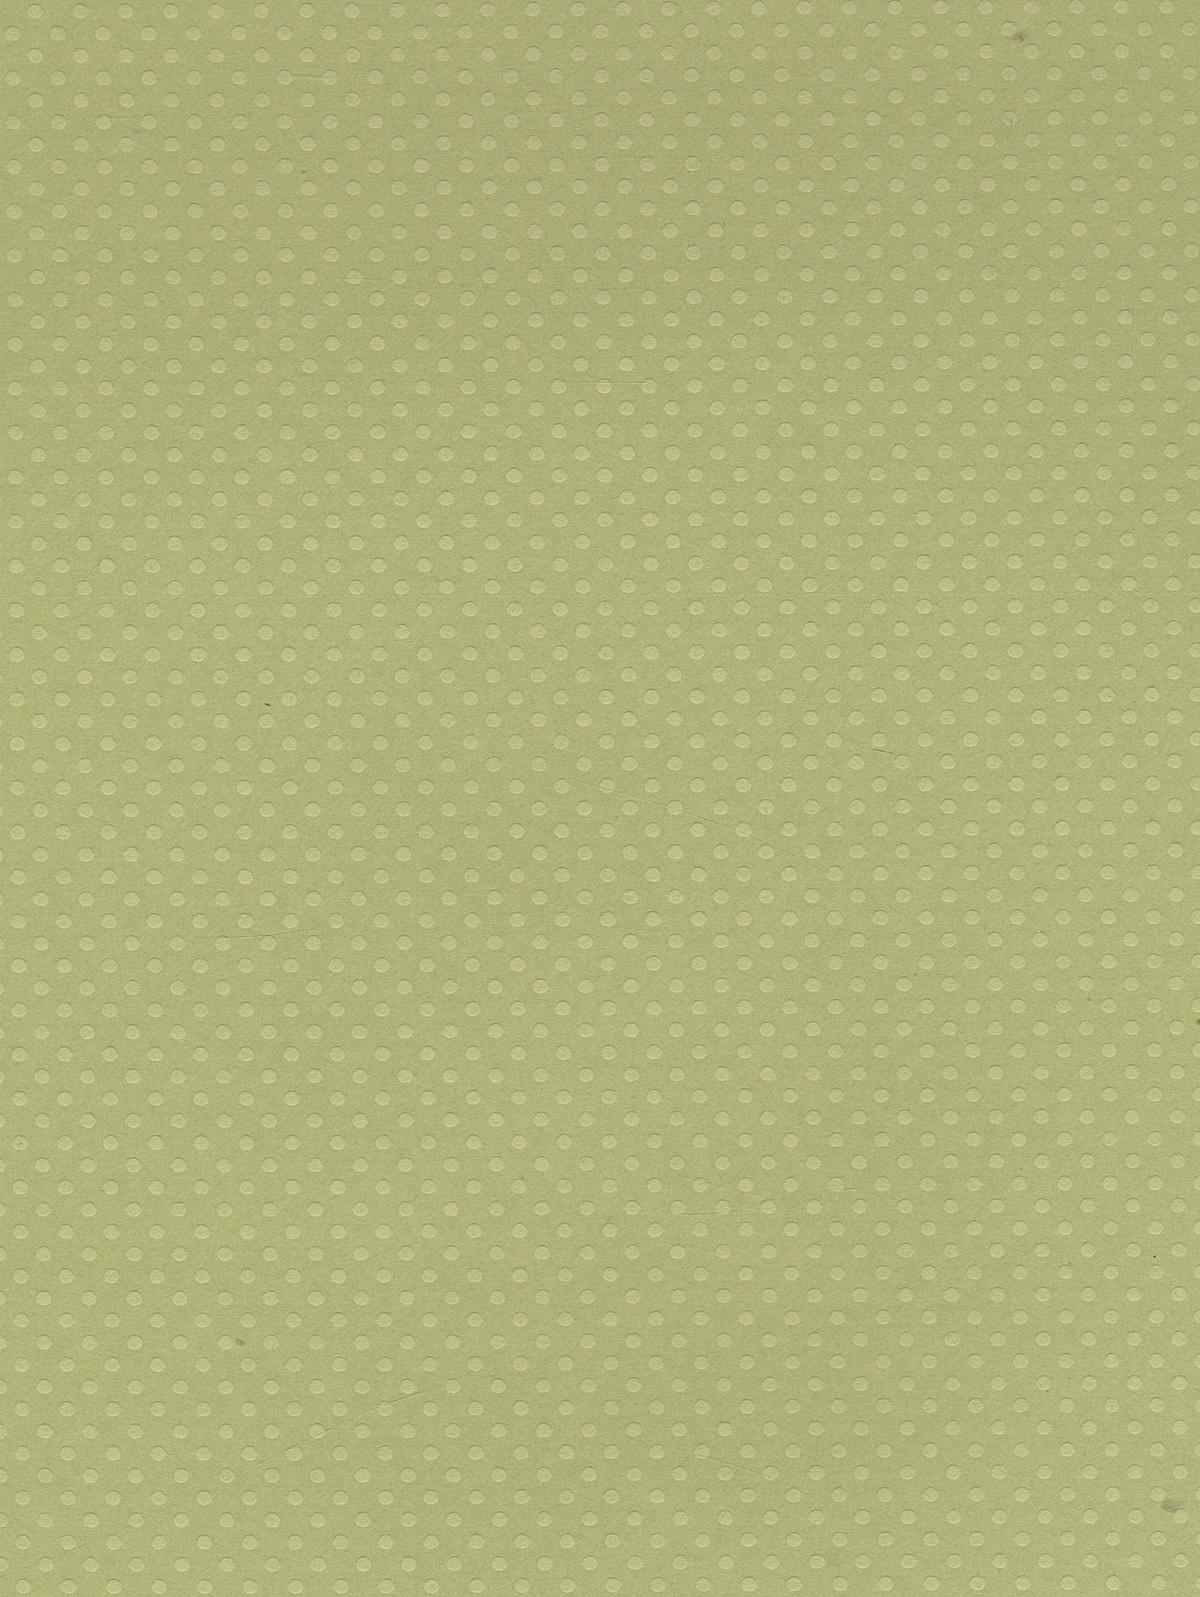 Dotted Swiss 80 Lb. Cardstock 8 1 2 In. X 11 In. Sheet Celtic Green